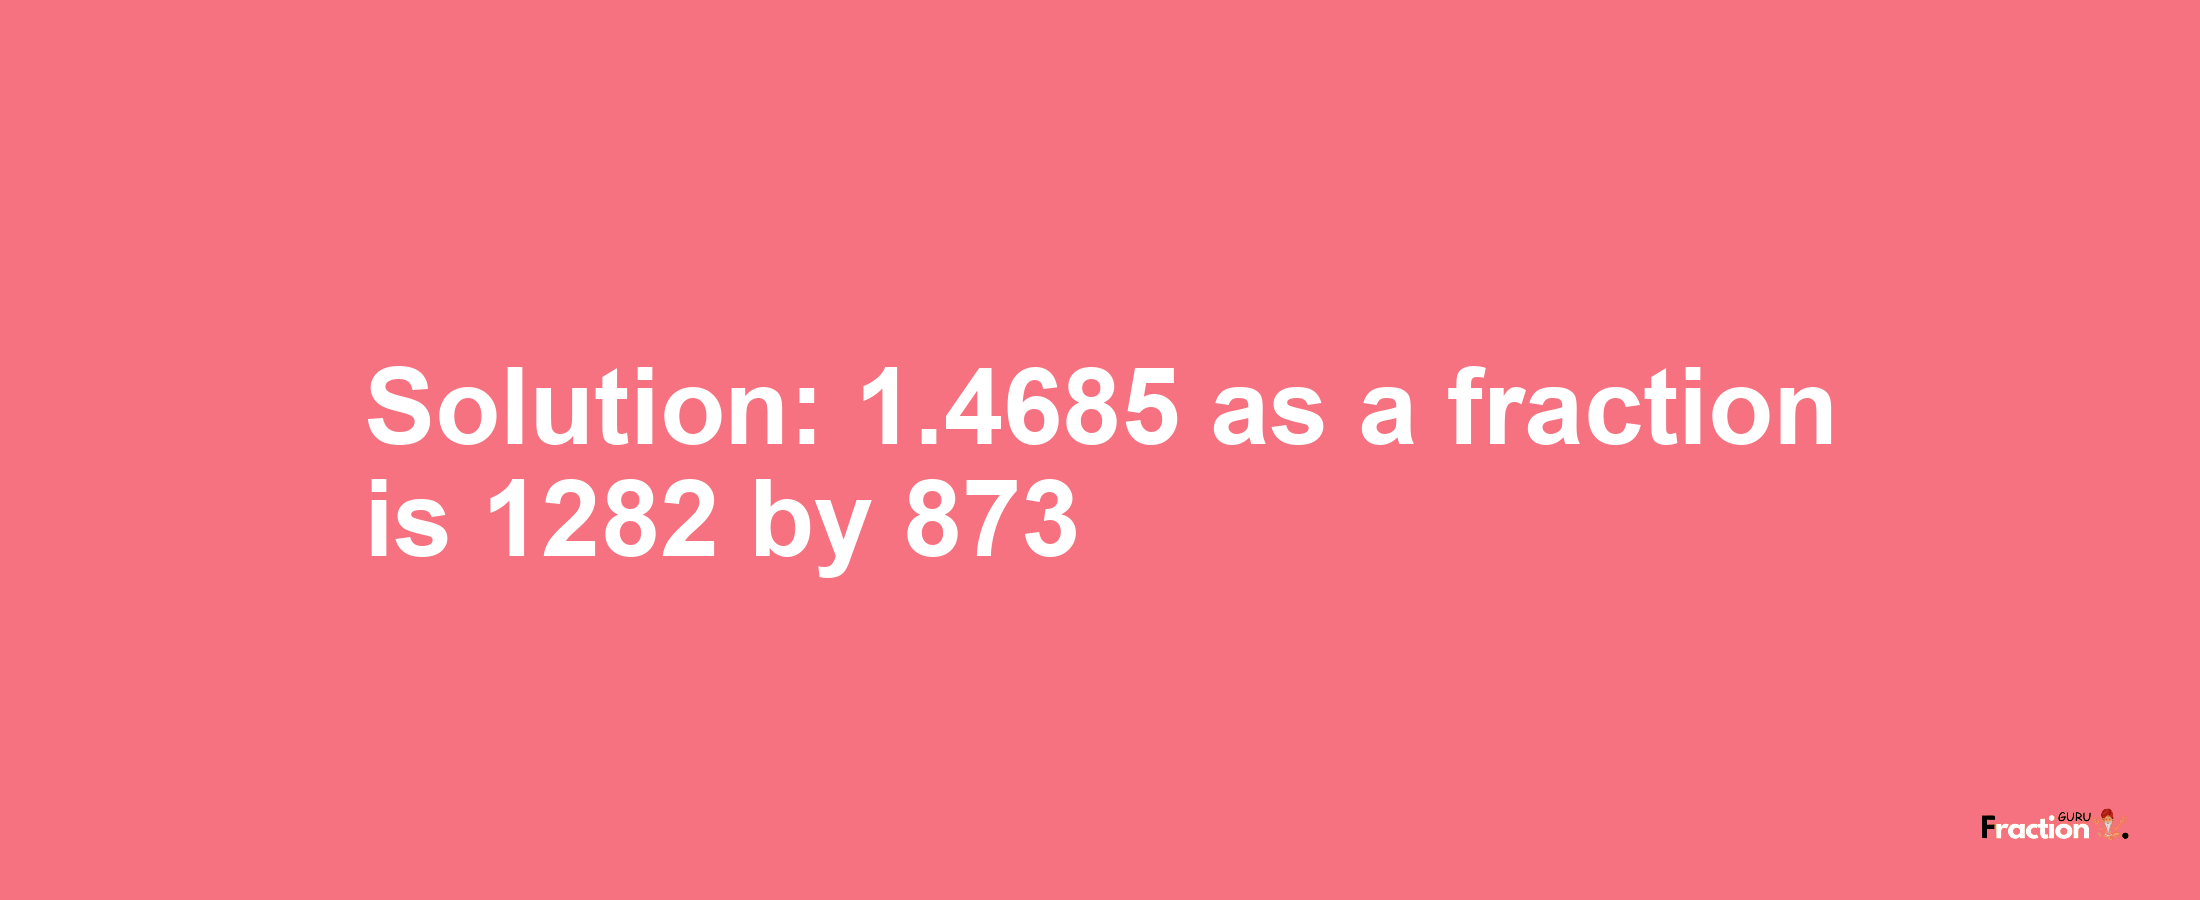 Solution:1.4685 as a fraction is 1282/873